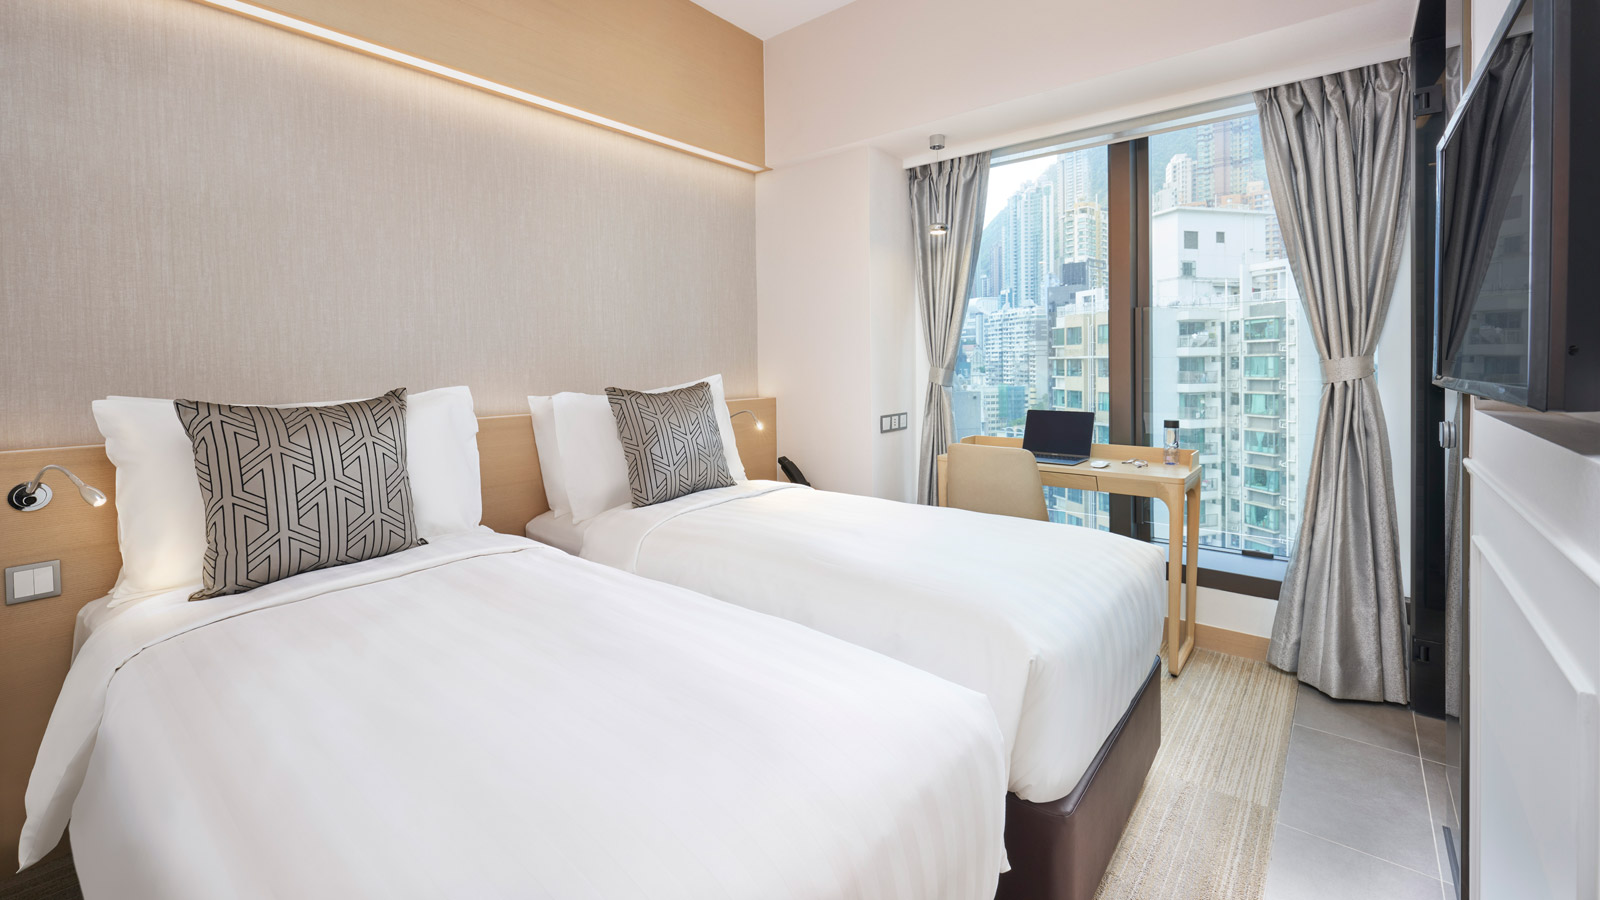 Deluxe Twin - Y Hotel Hong Kong (Images are a visual preview and may vary)